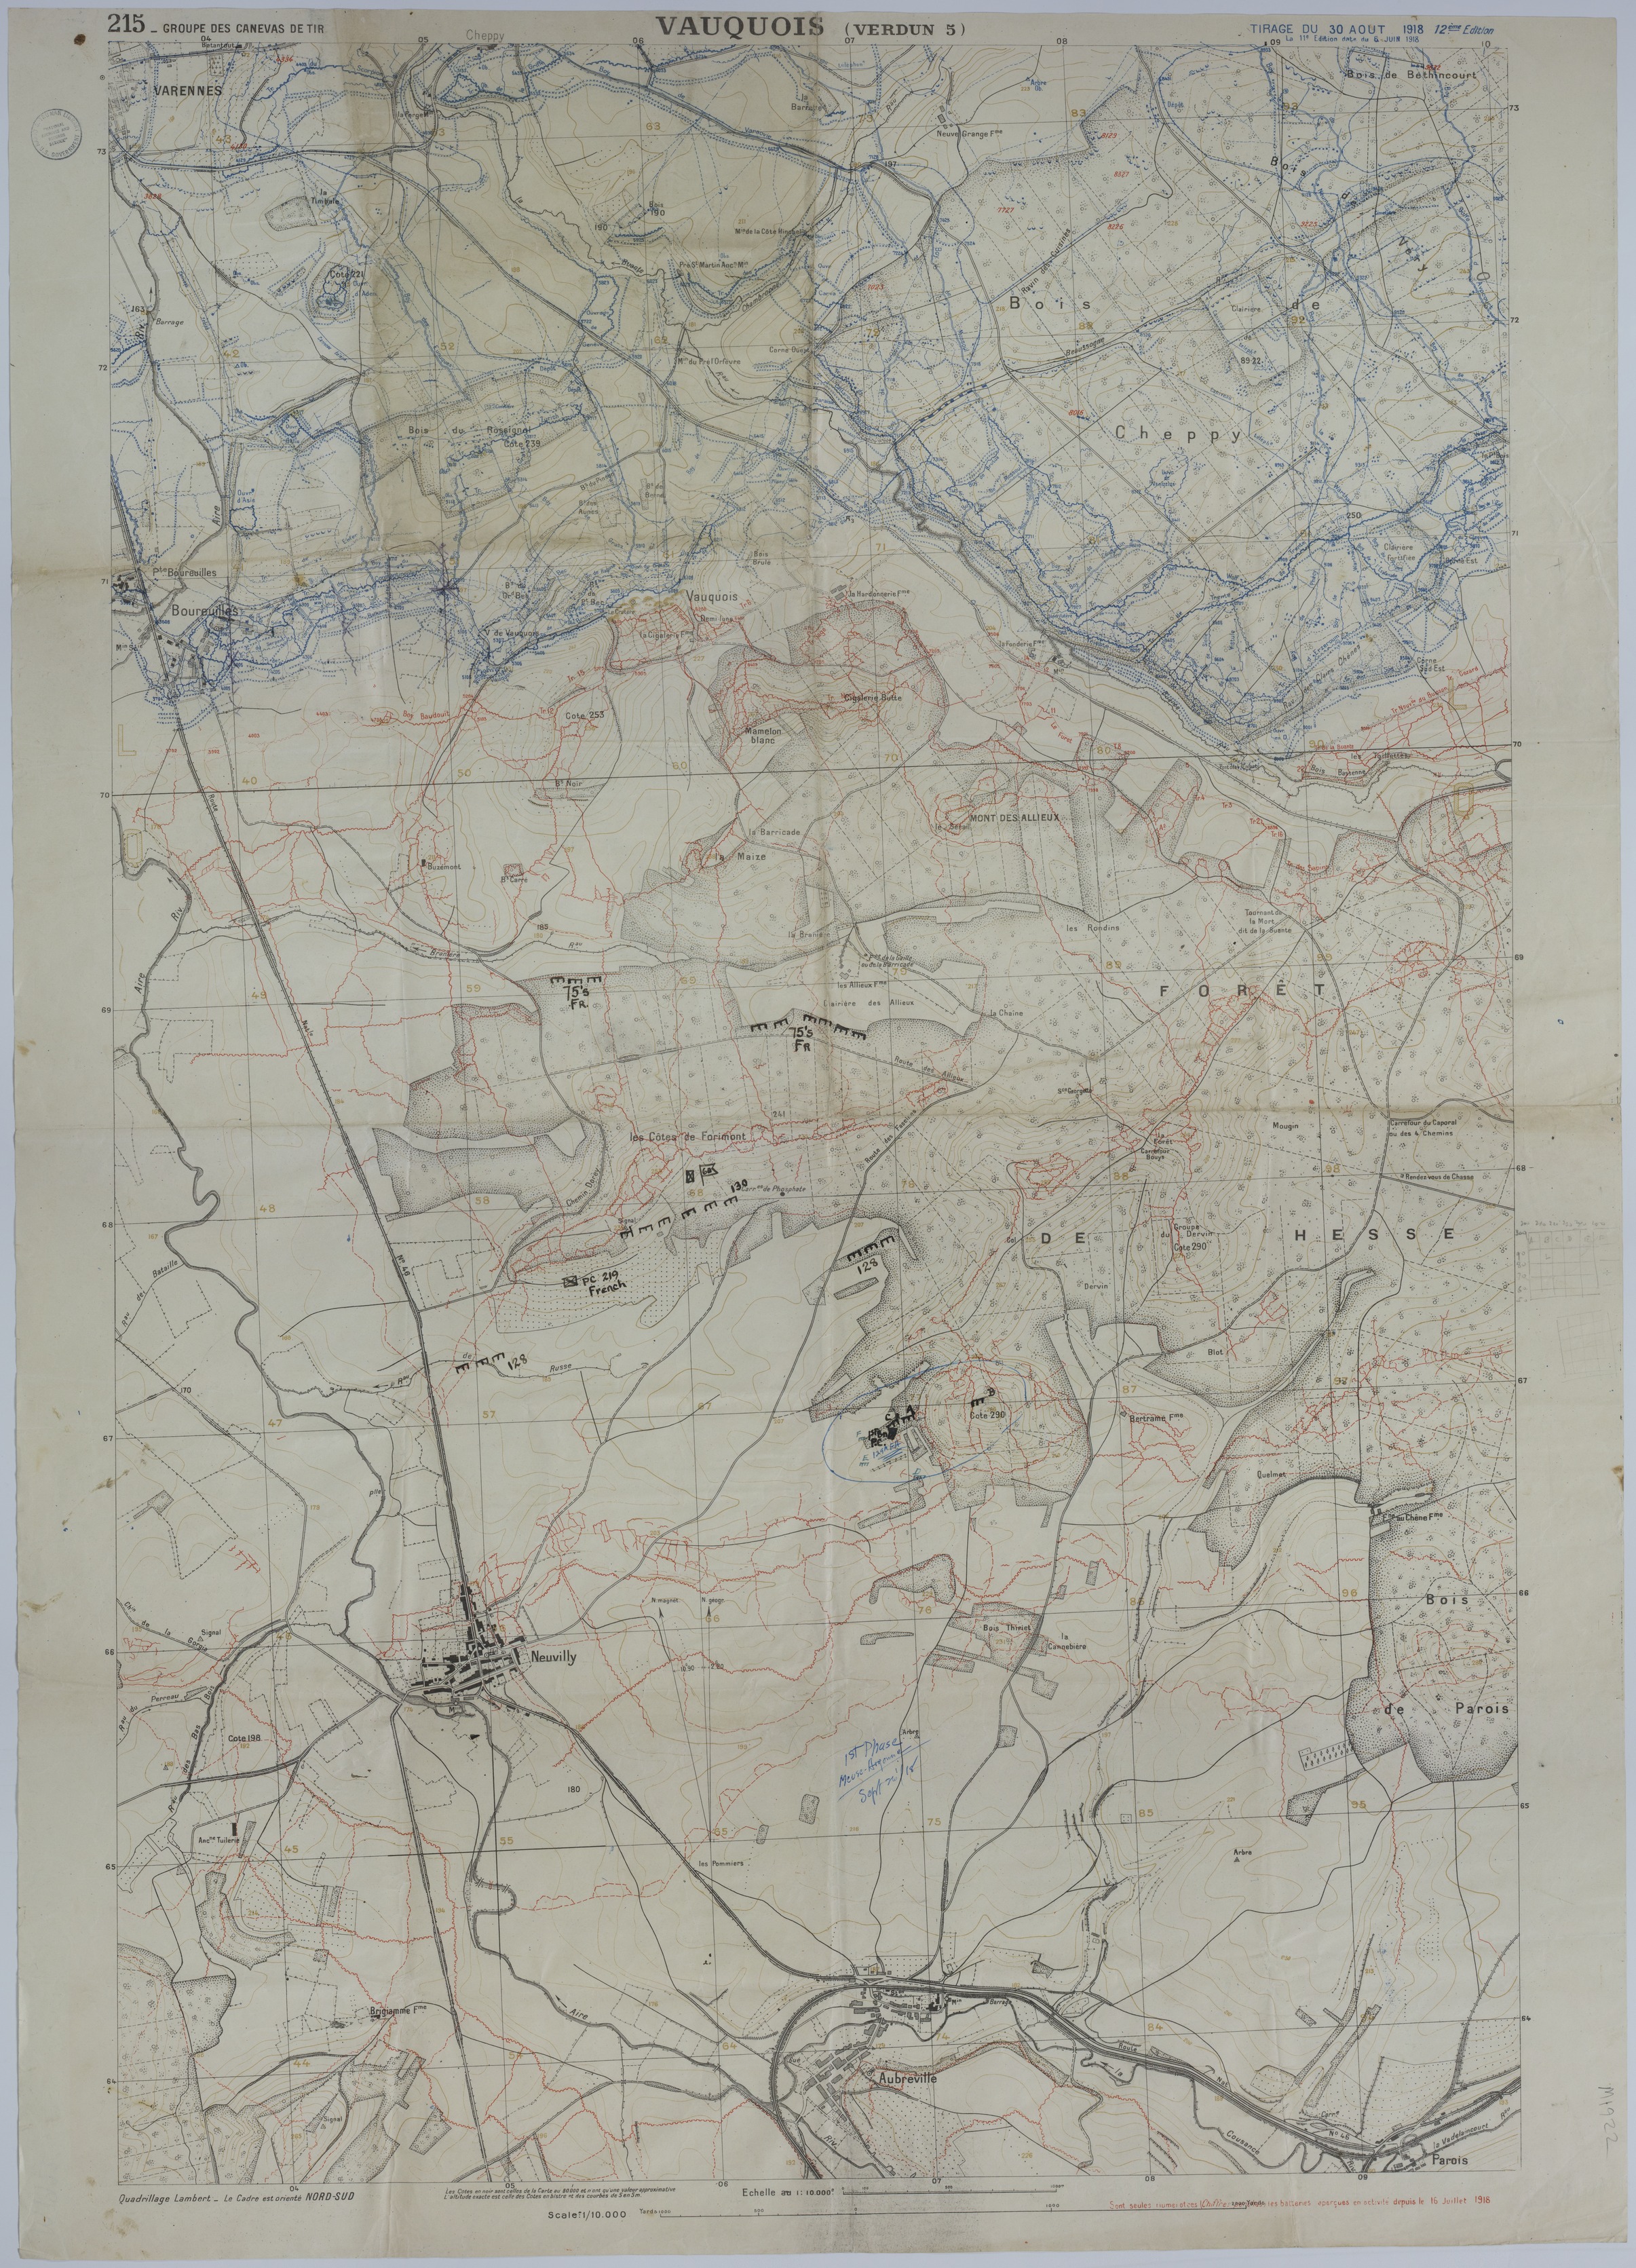 Map of Artillery Positions on September 26, 1918